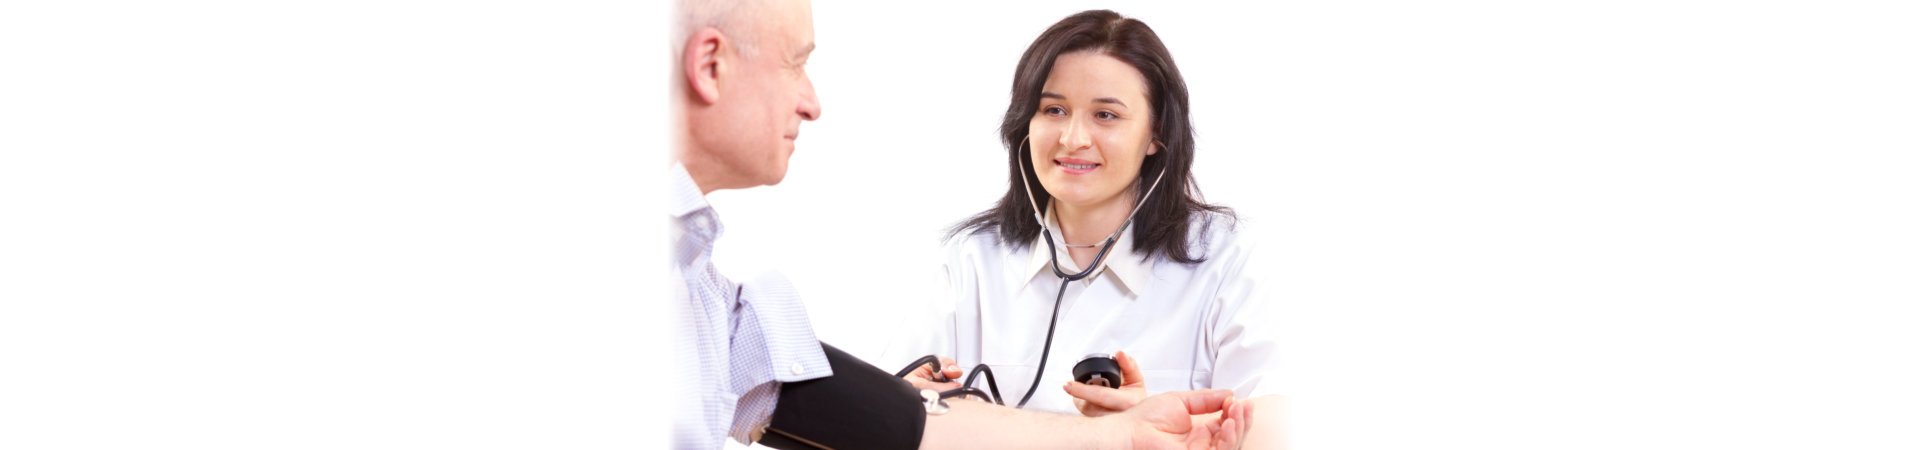 doctor checking old man's blood pressure